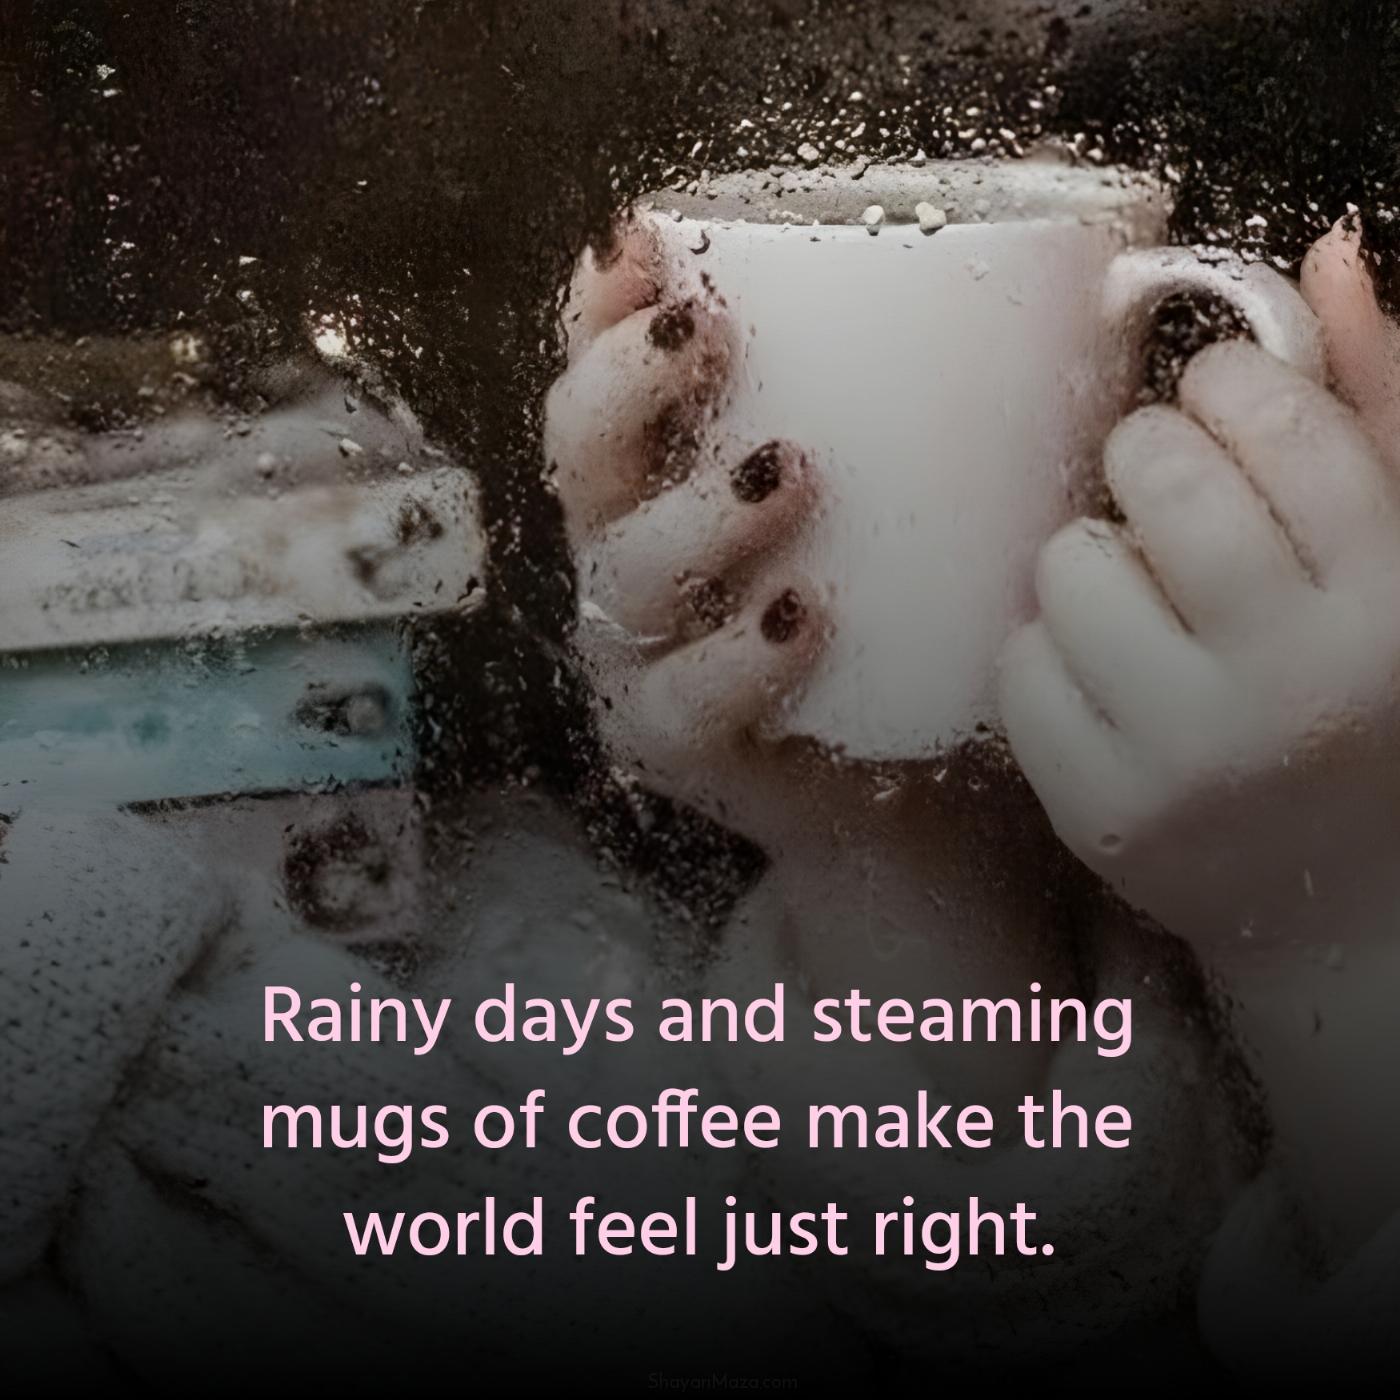 Rainy days and steaming mugs of coffee make the world feel just right